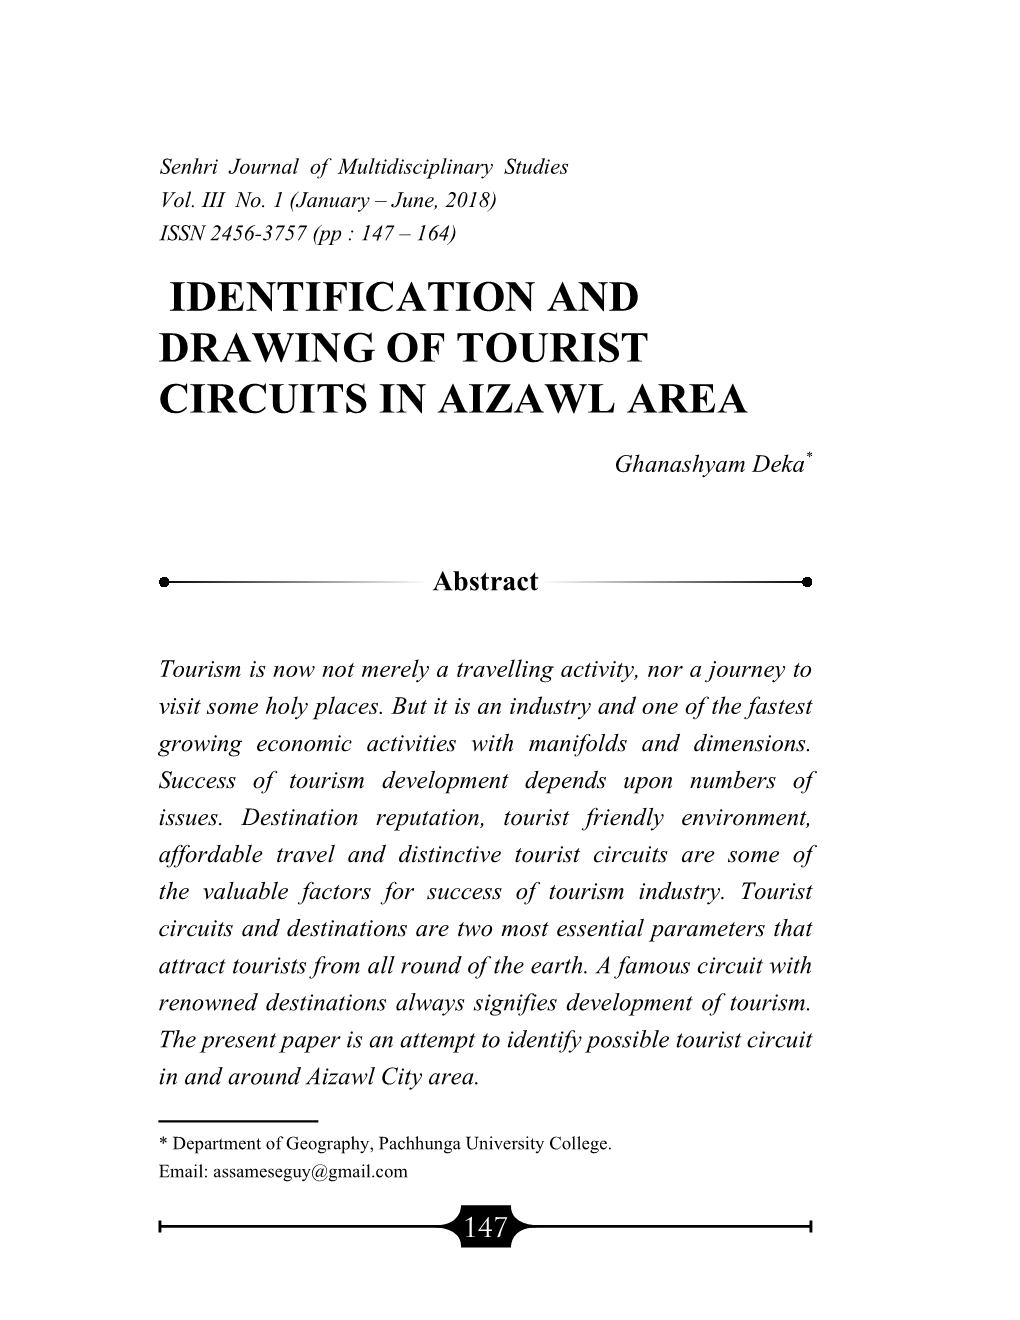 IDENTIFICATION and DRAWING of TOURIST CIRCUITS in AIZAWL AREA Ghanashyam Deka*